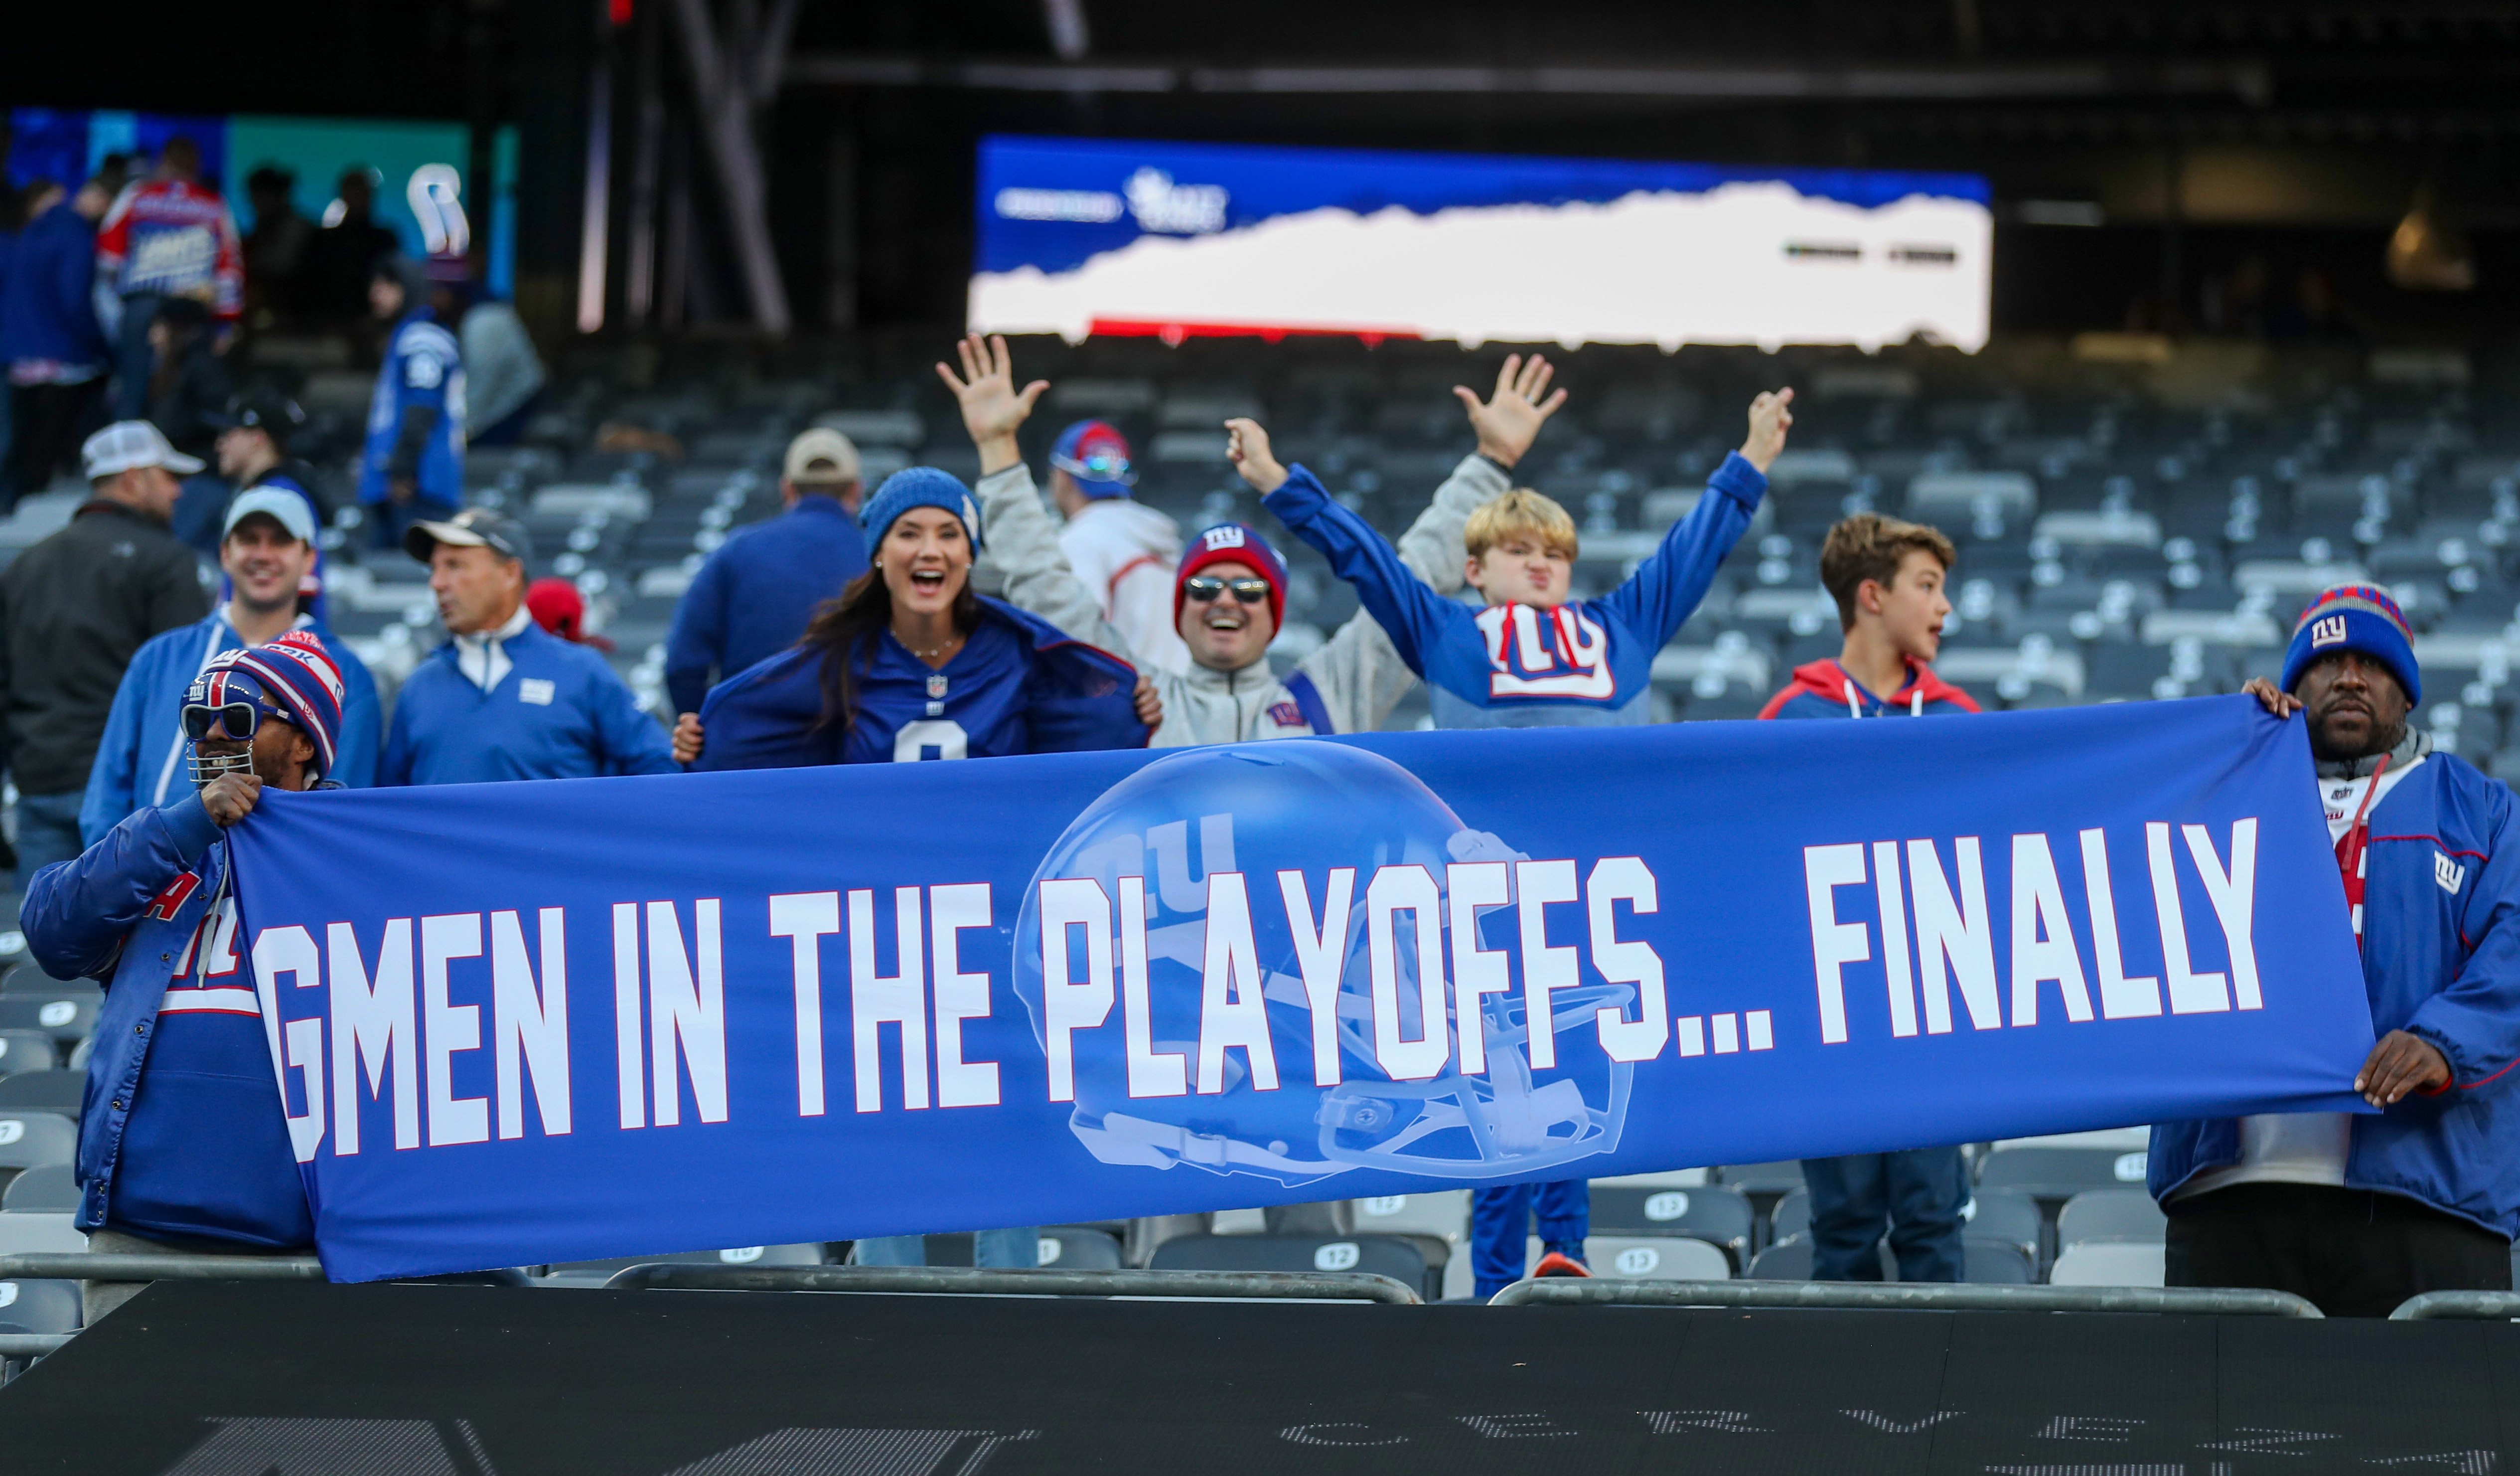 Giants Now: Social media reaction to playoff-bound Giants